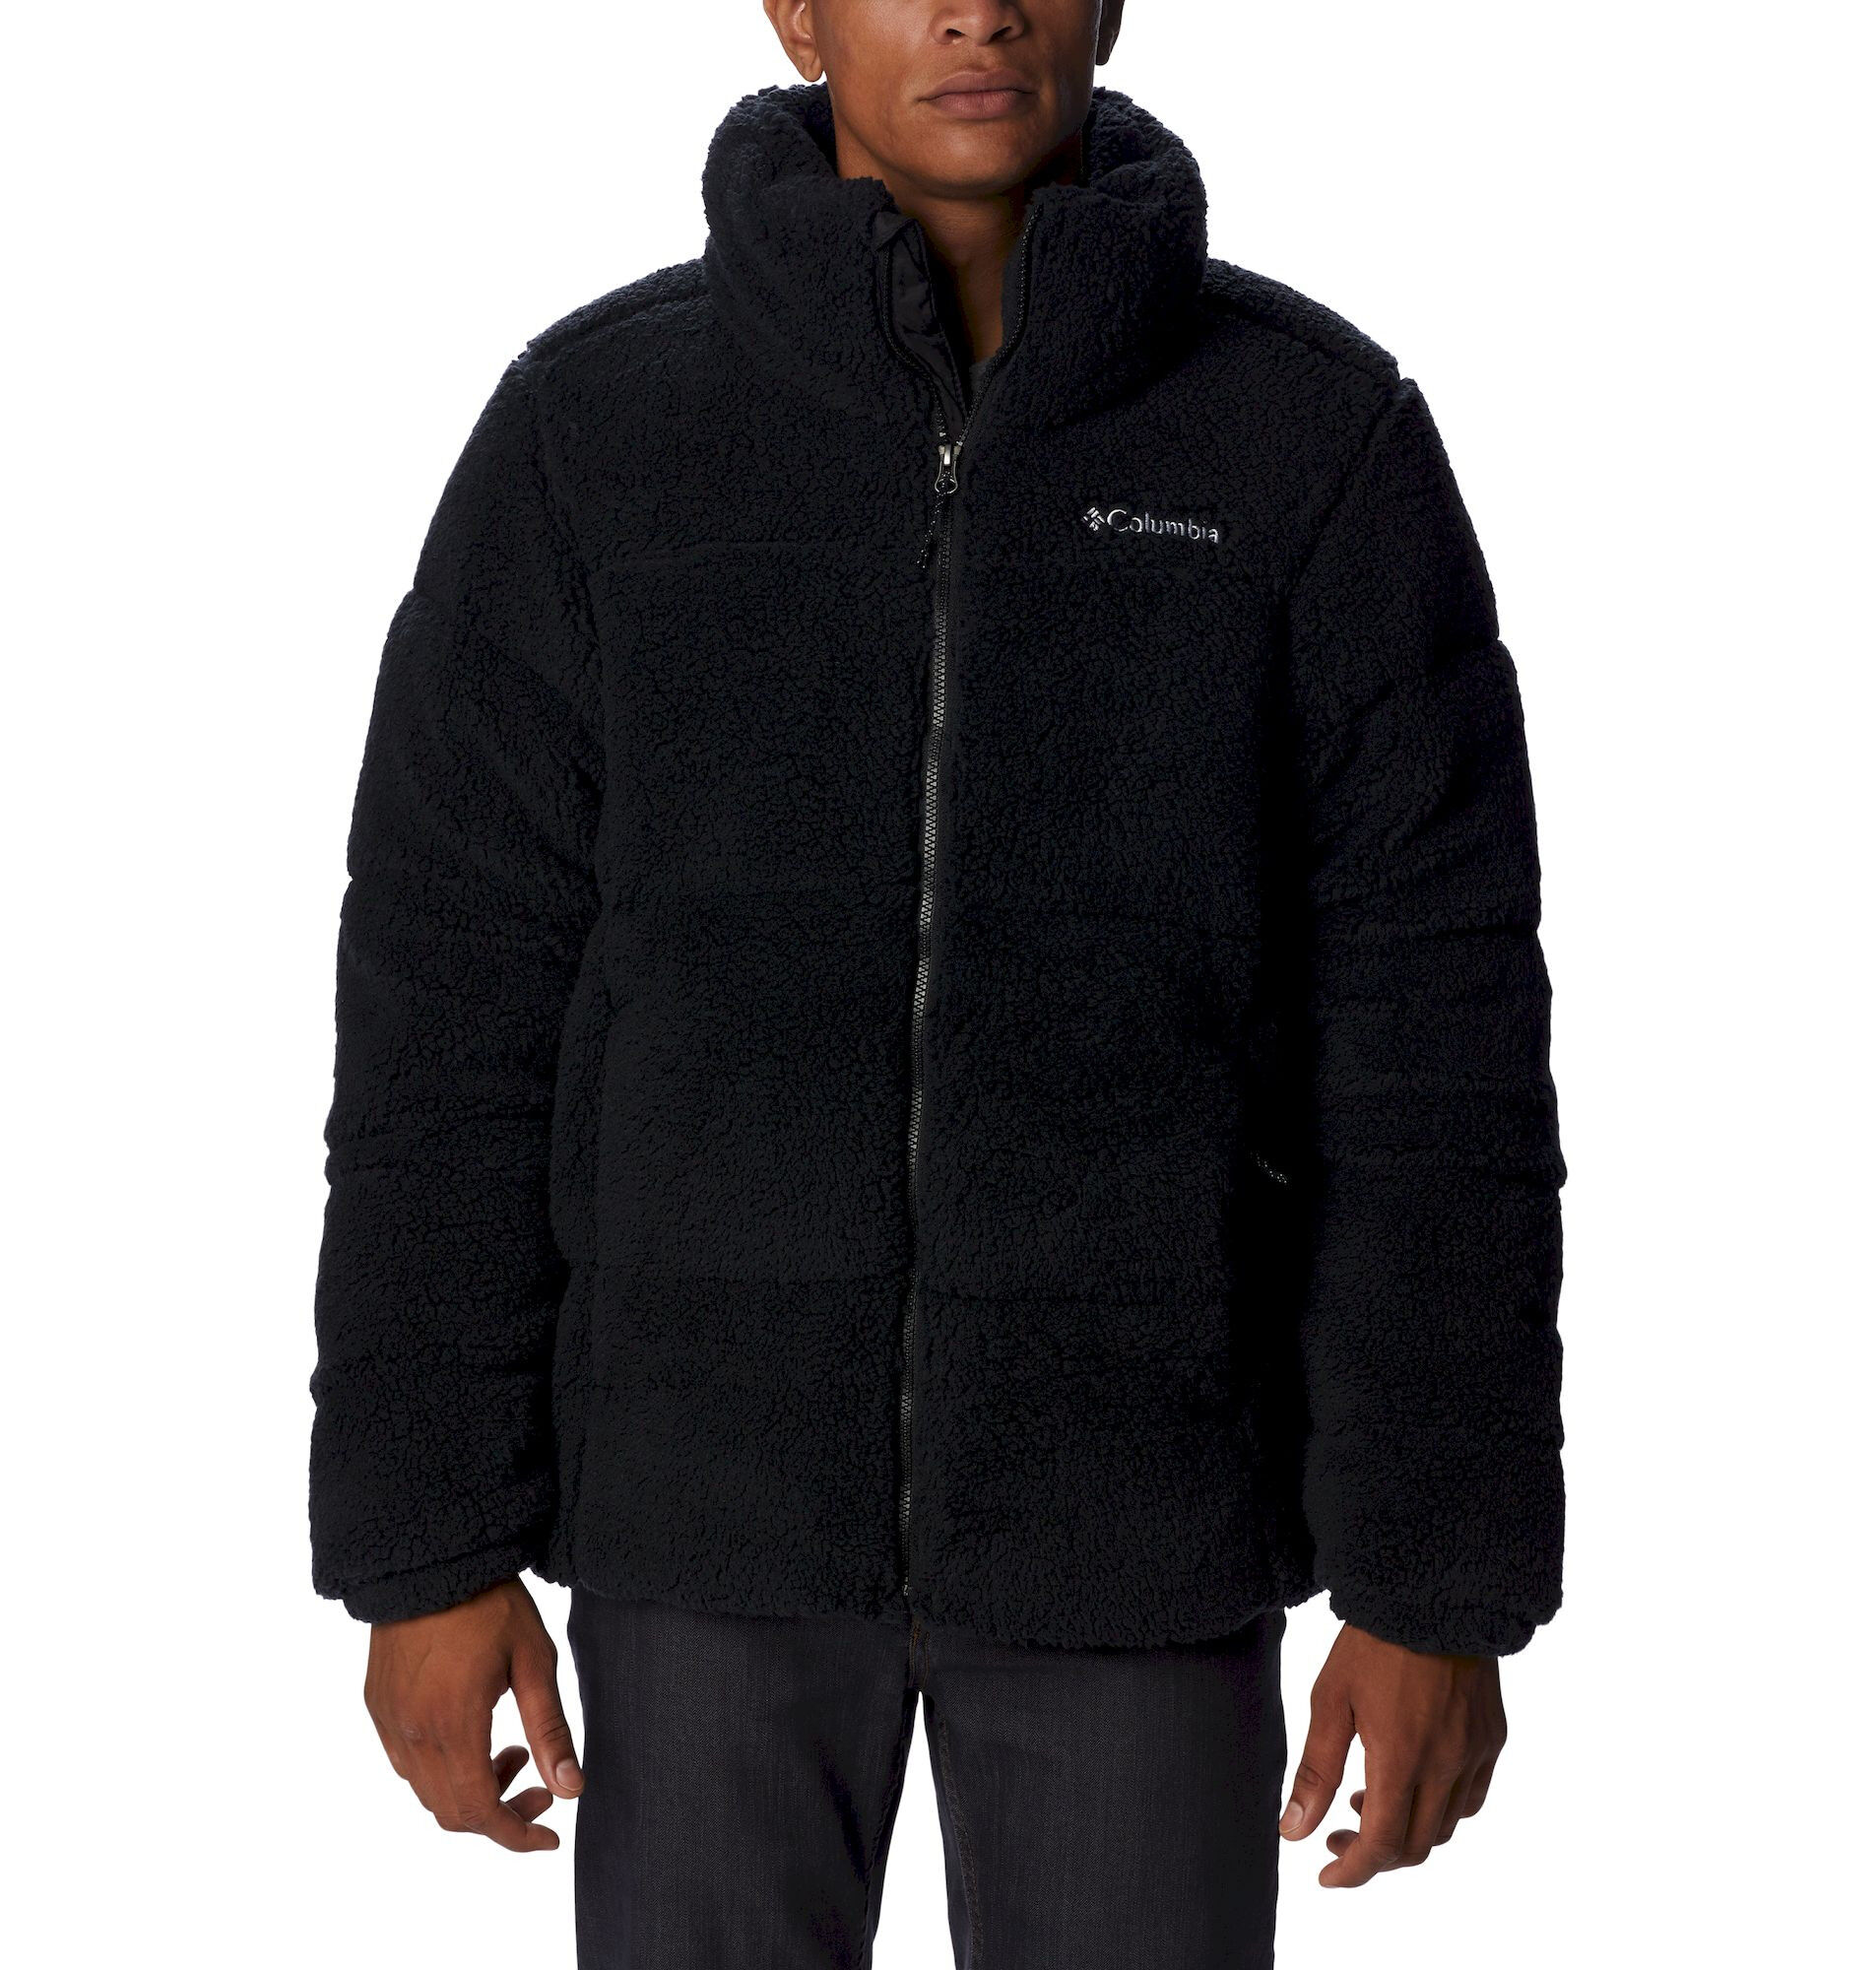 Columbia Puffect Sherpa Jacket - Polaire homme | Hardloop